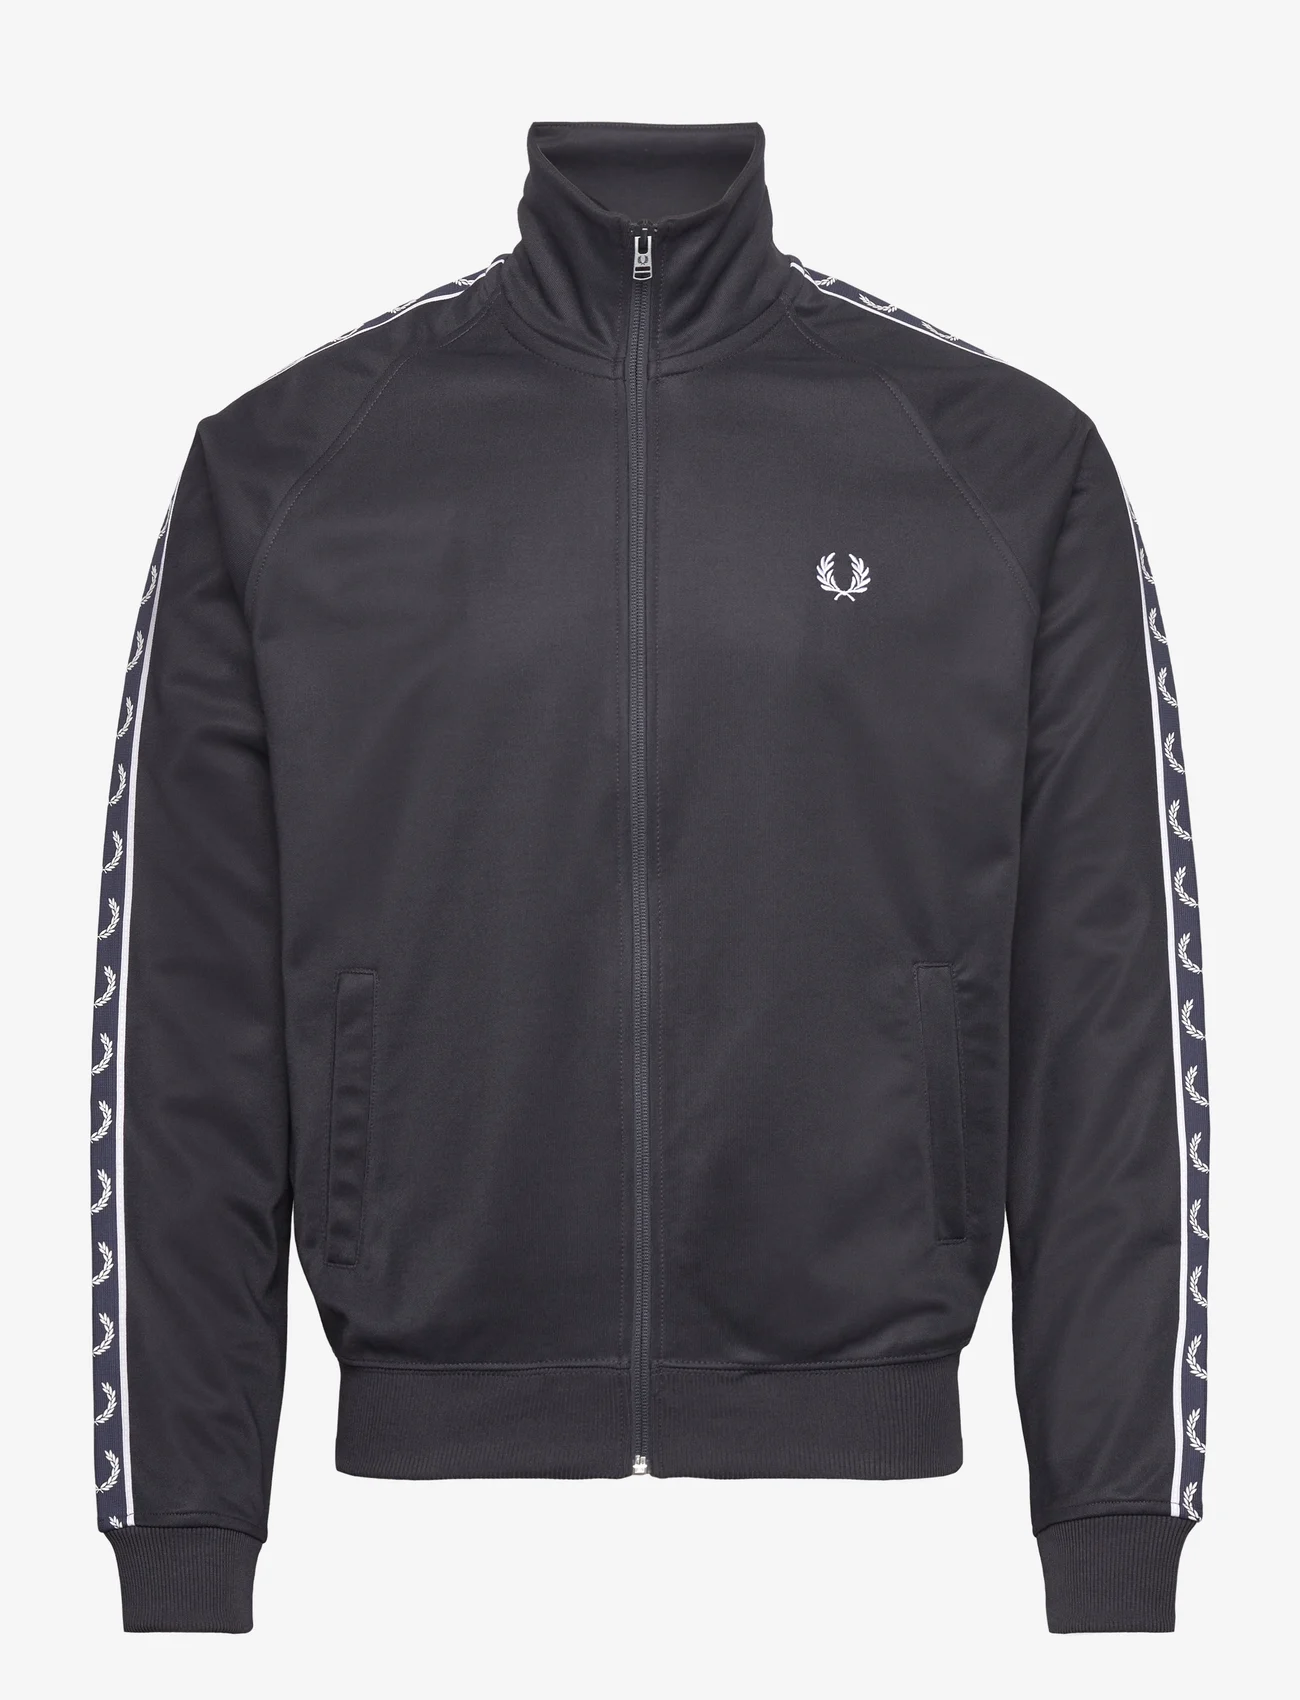 Fred Perry - CONTRAST TAPE TRK JKT - sweatshirts - navy/navy - 0